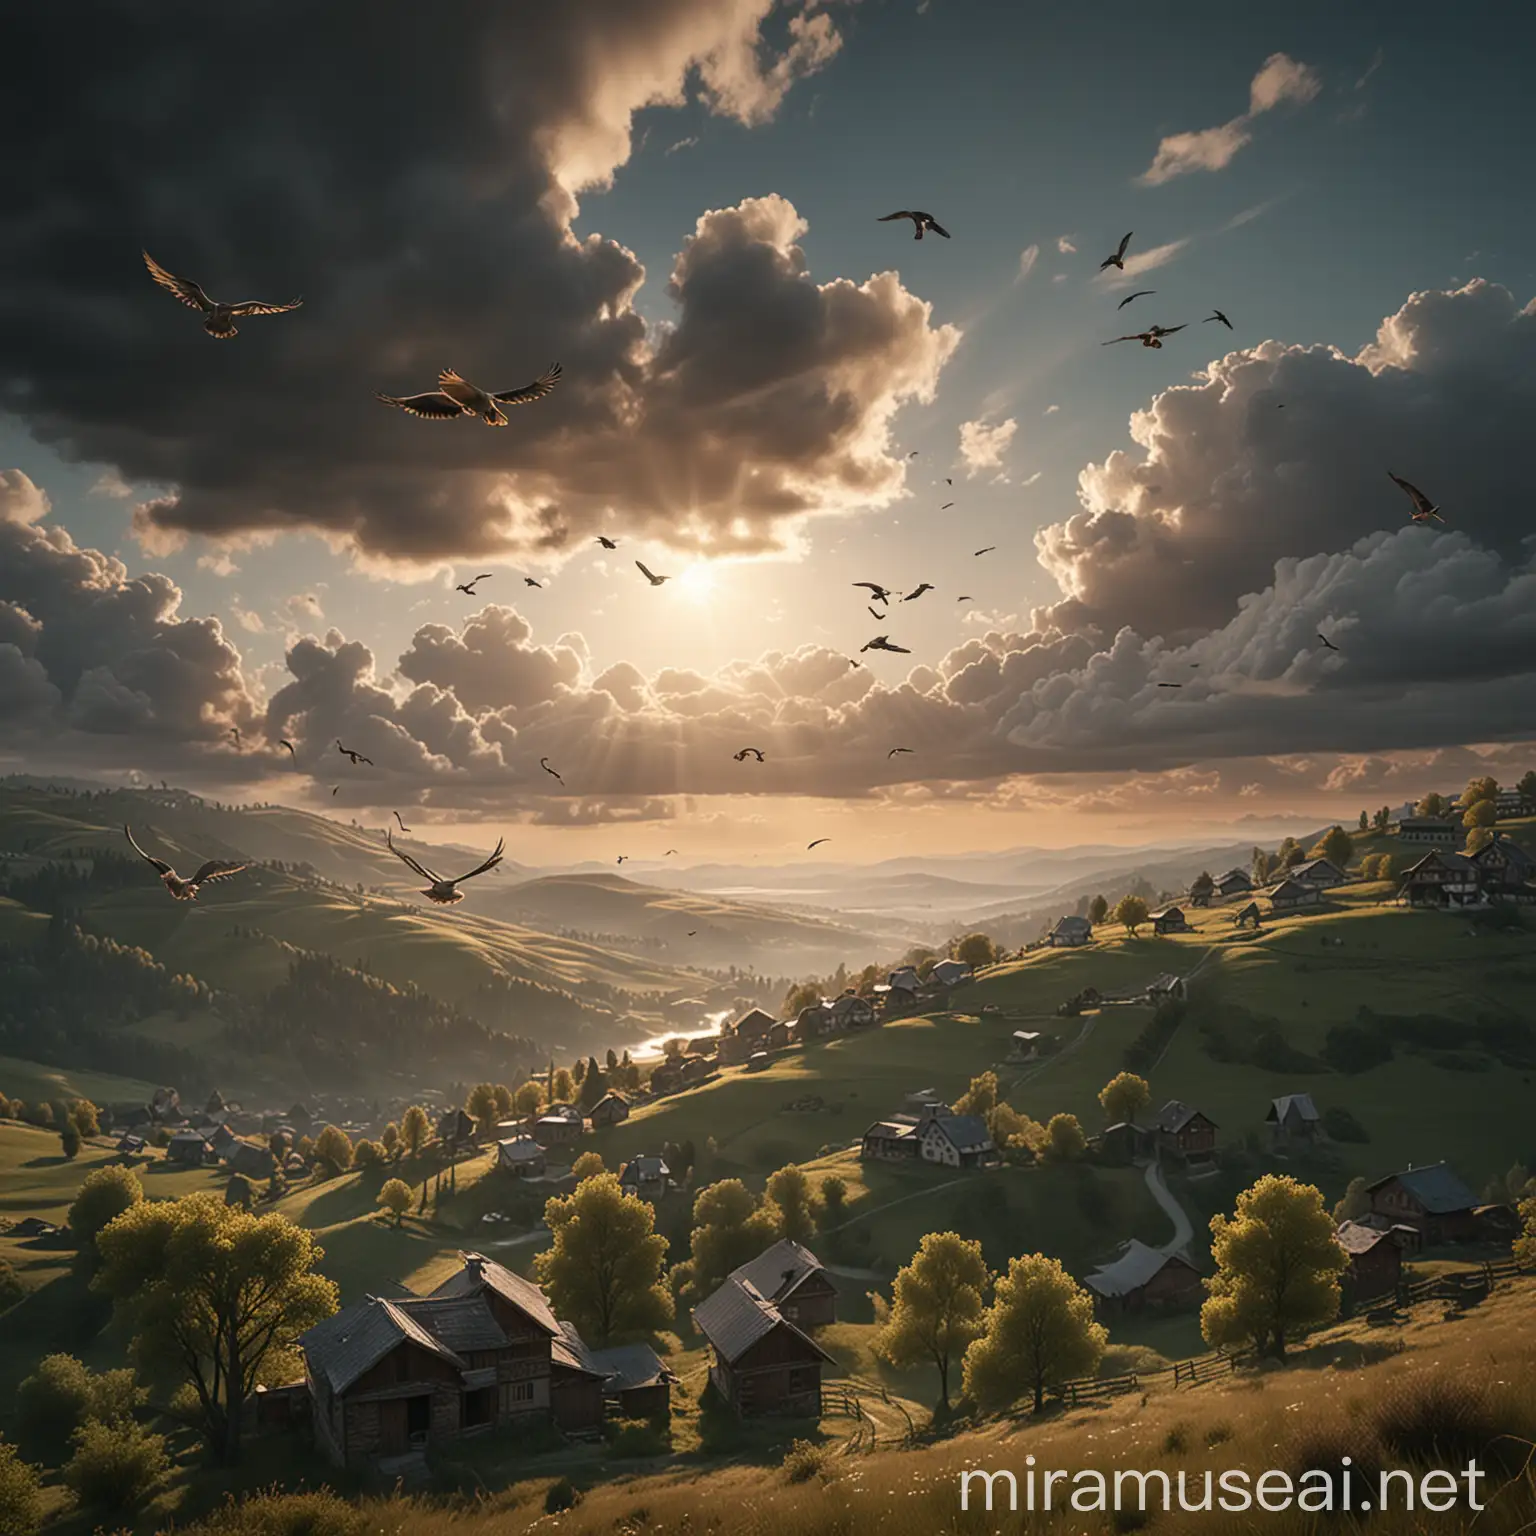 Tranquil Mountain Landscape with Charming Village and Soaring Birds